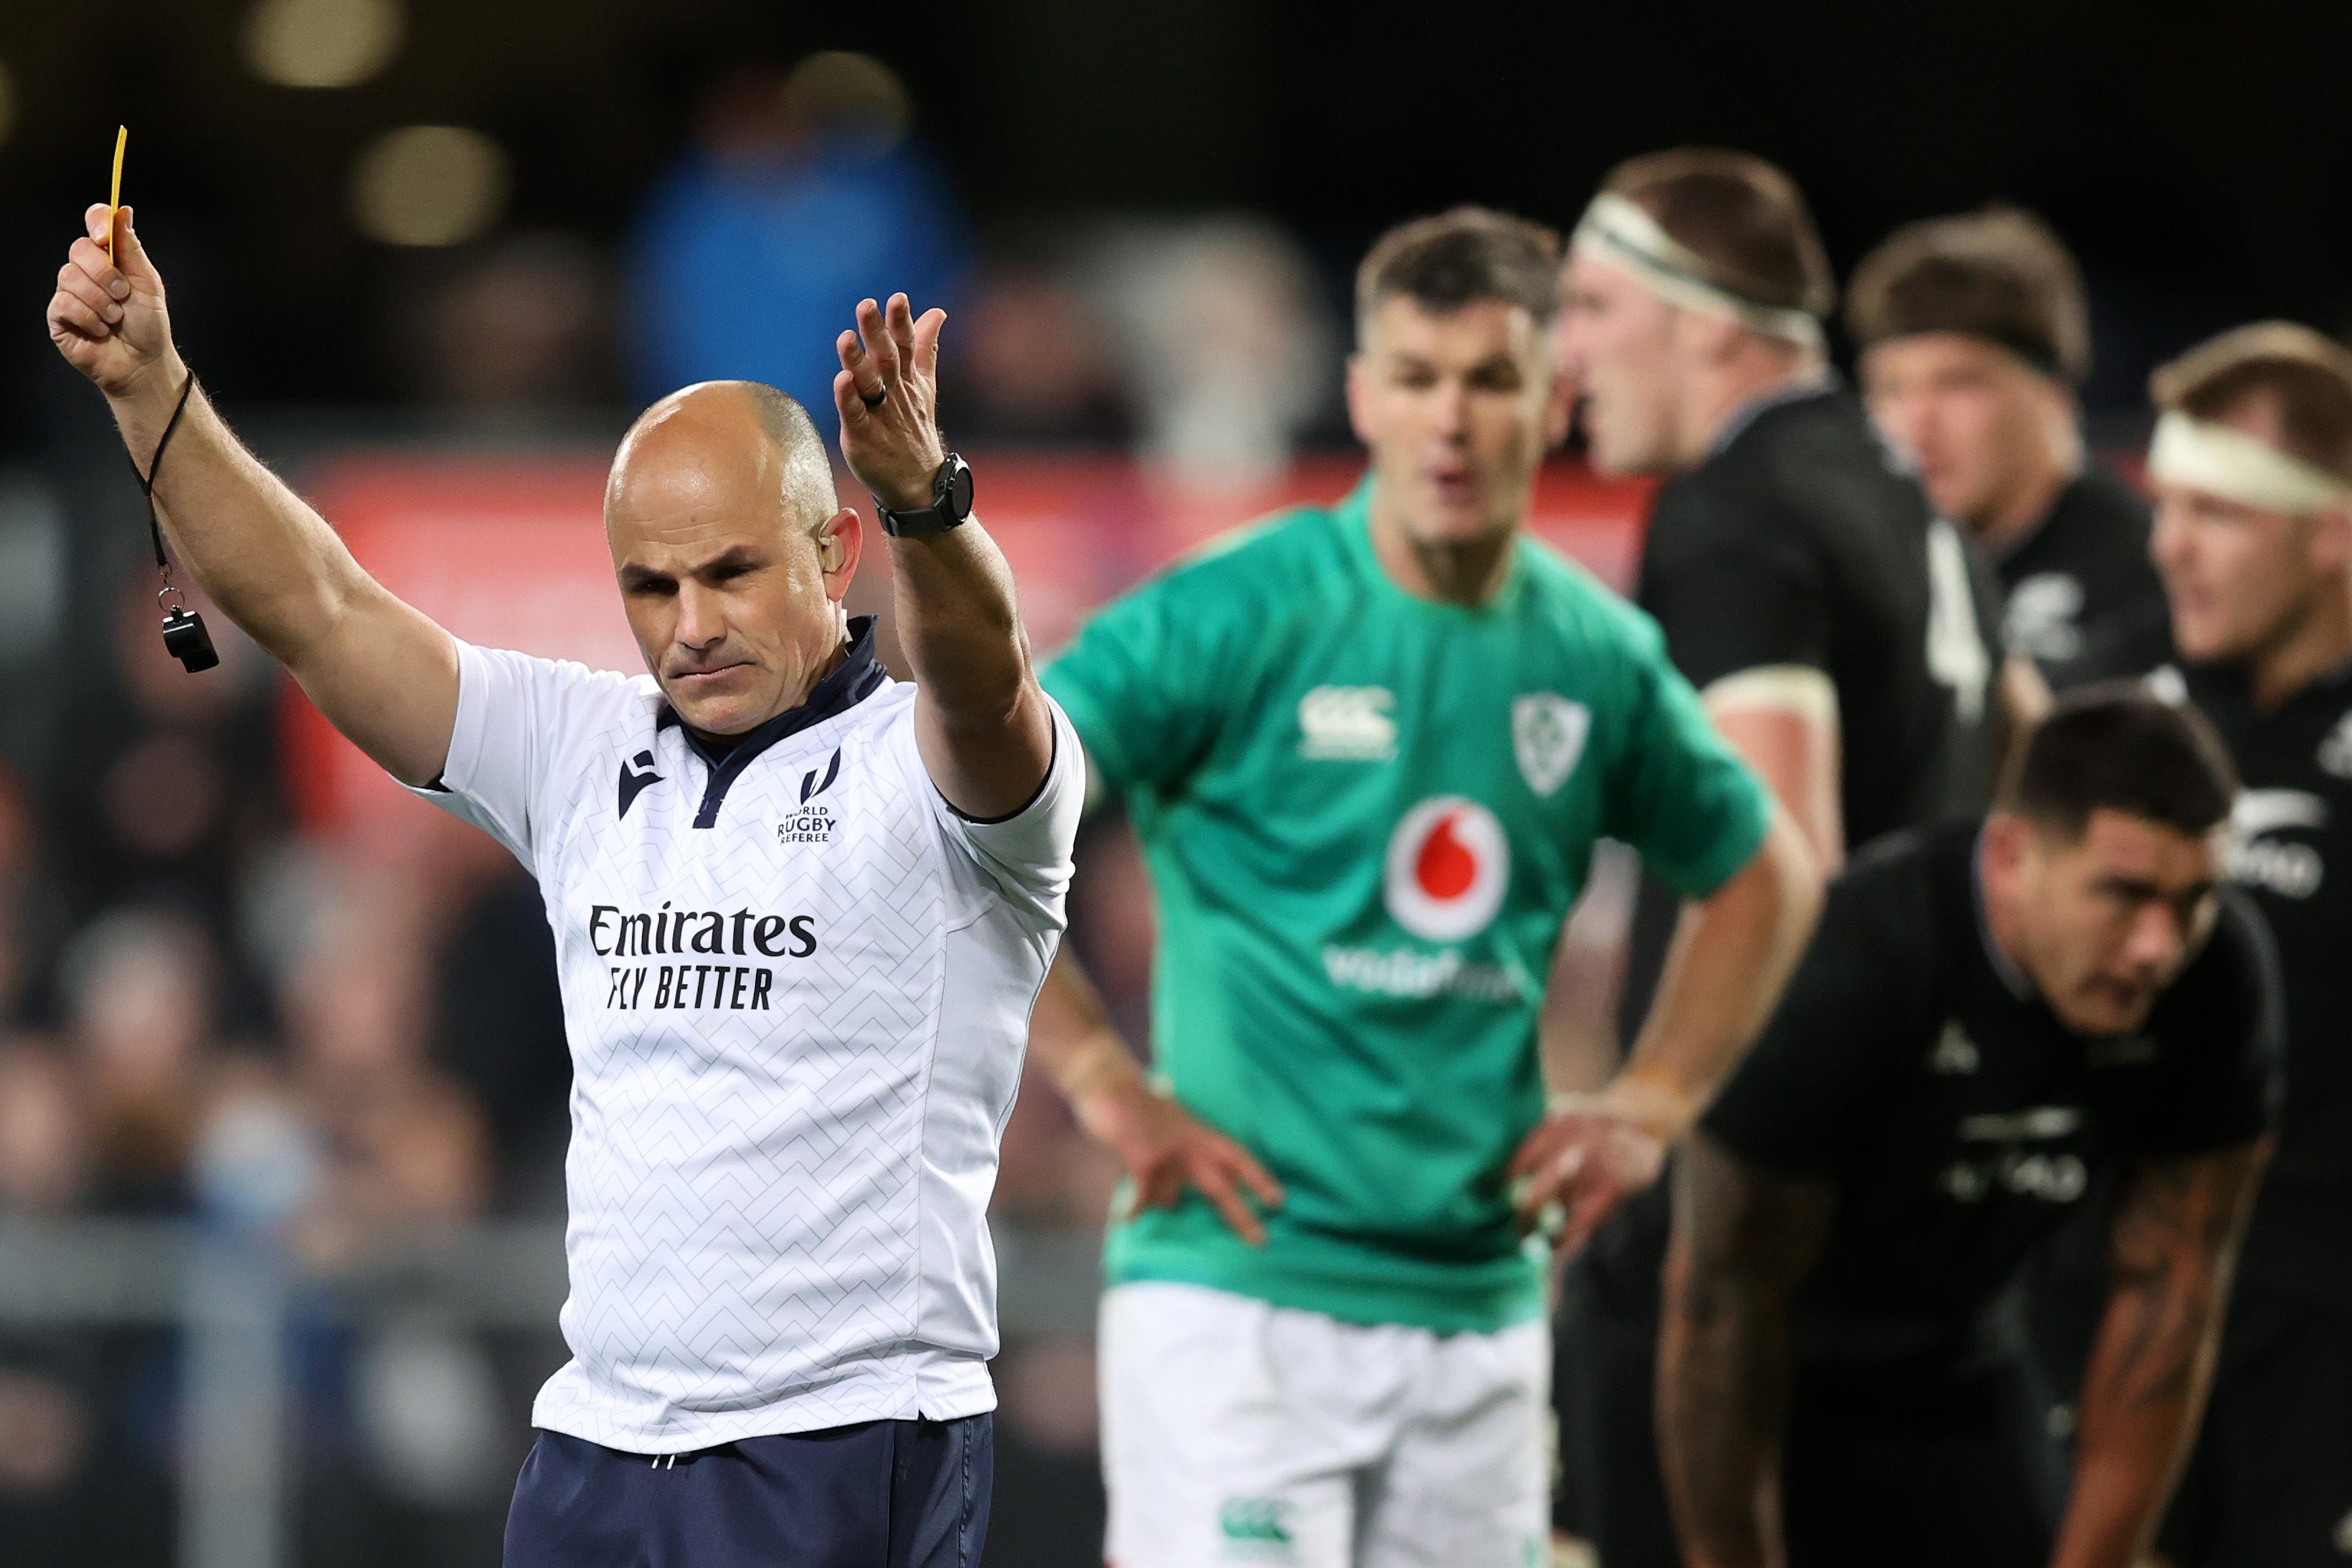 Referee Jaco Peyper was busy with his cards in Dunedin on Saturday